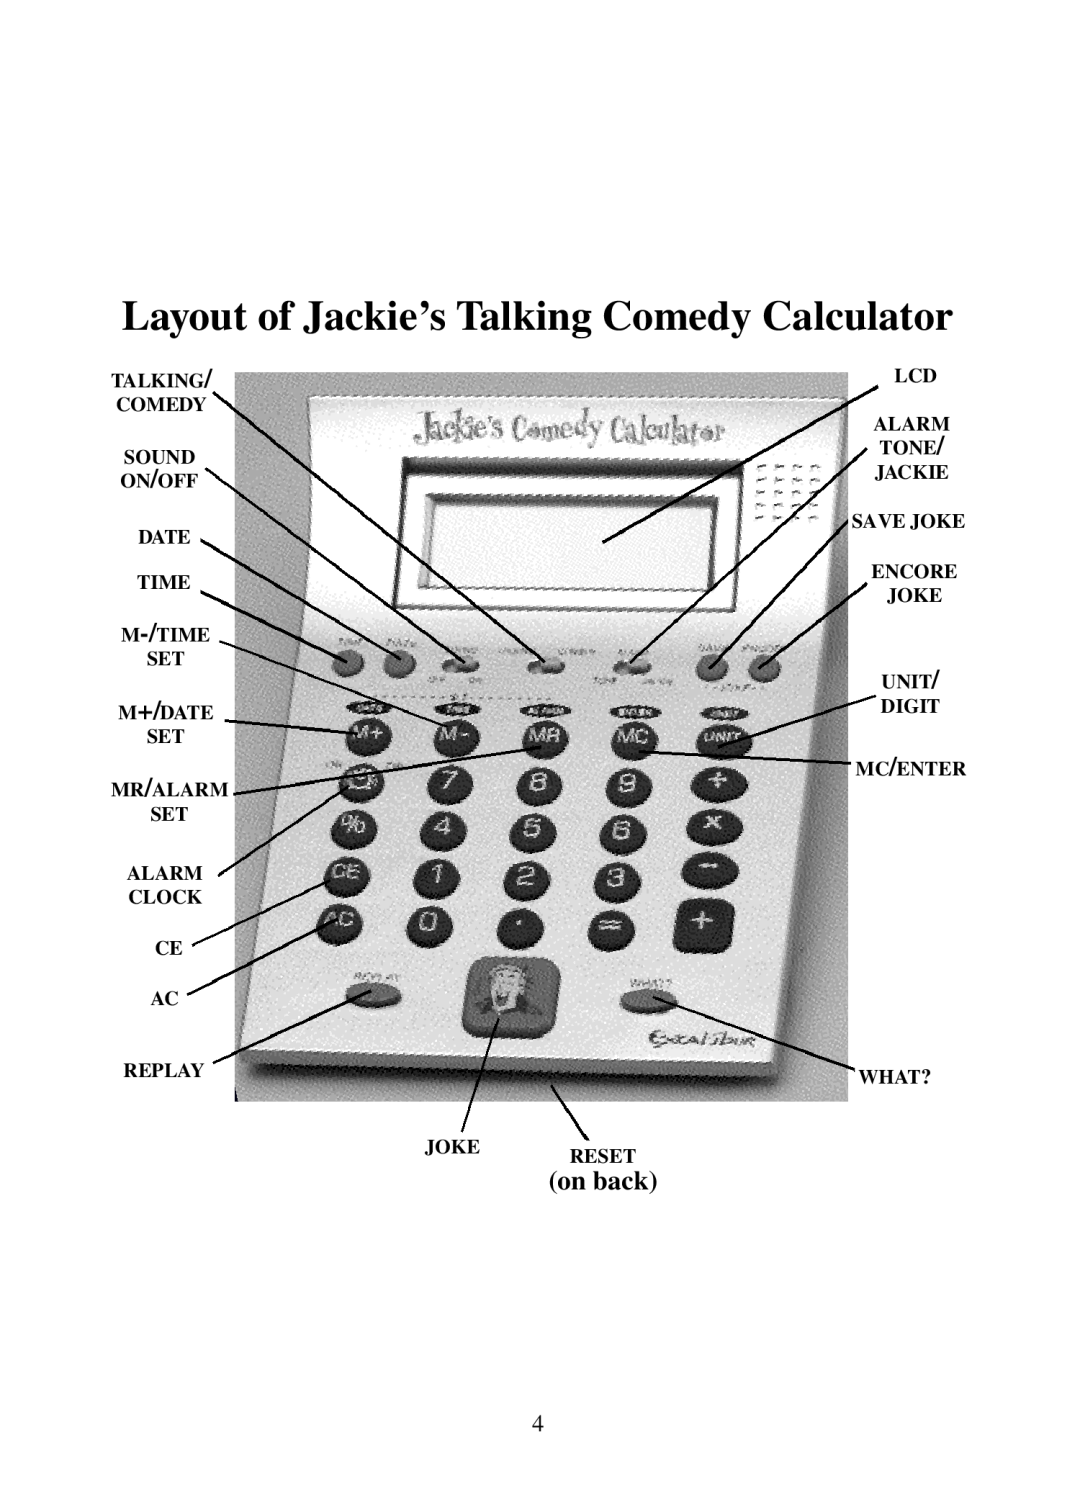 Excalibur electronic JK01 manual Layout of Jackie’s Talking Comedy Calculator, on back 